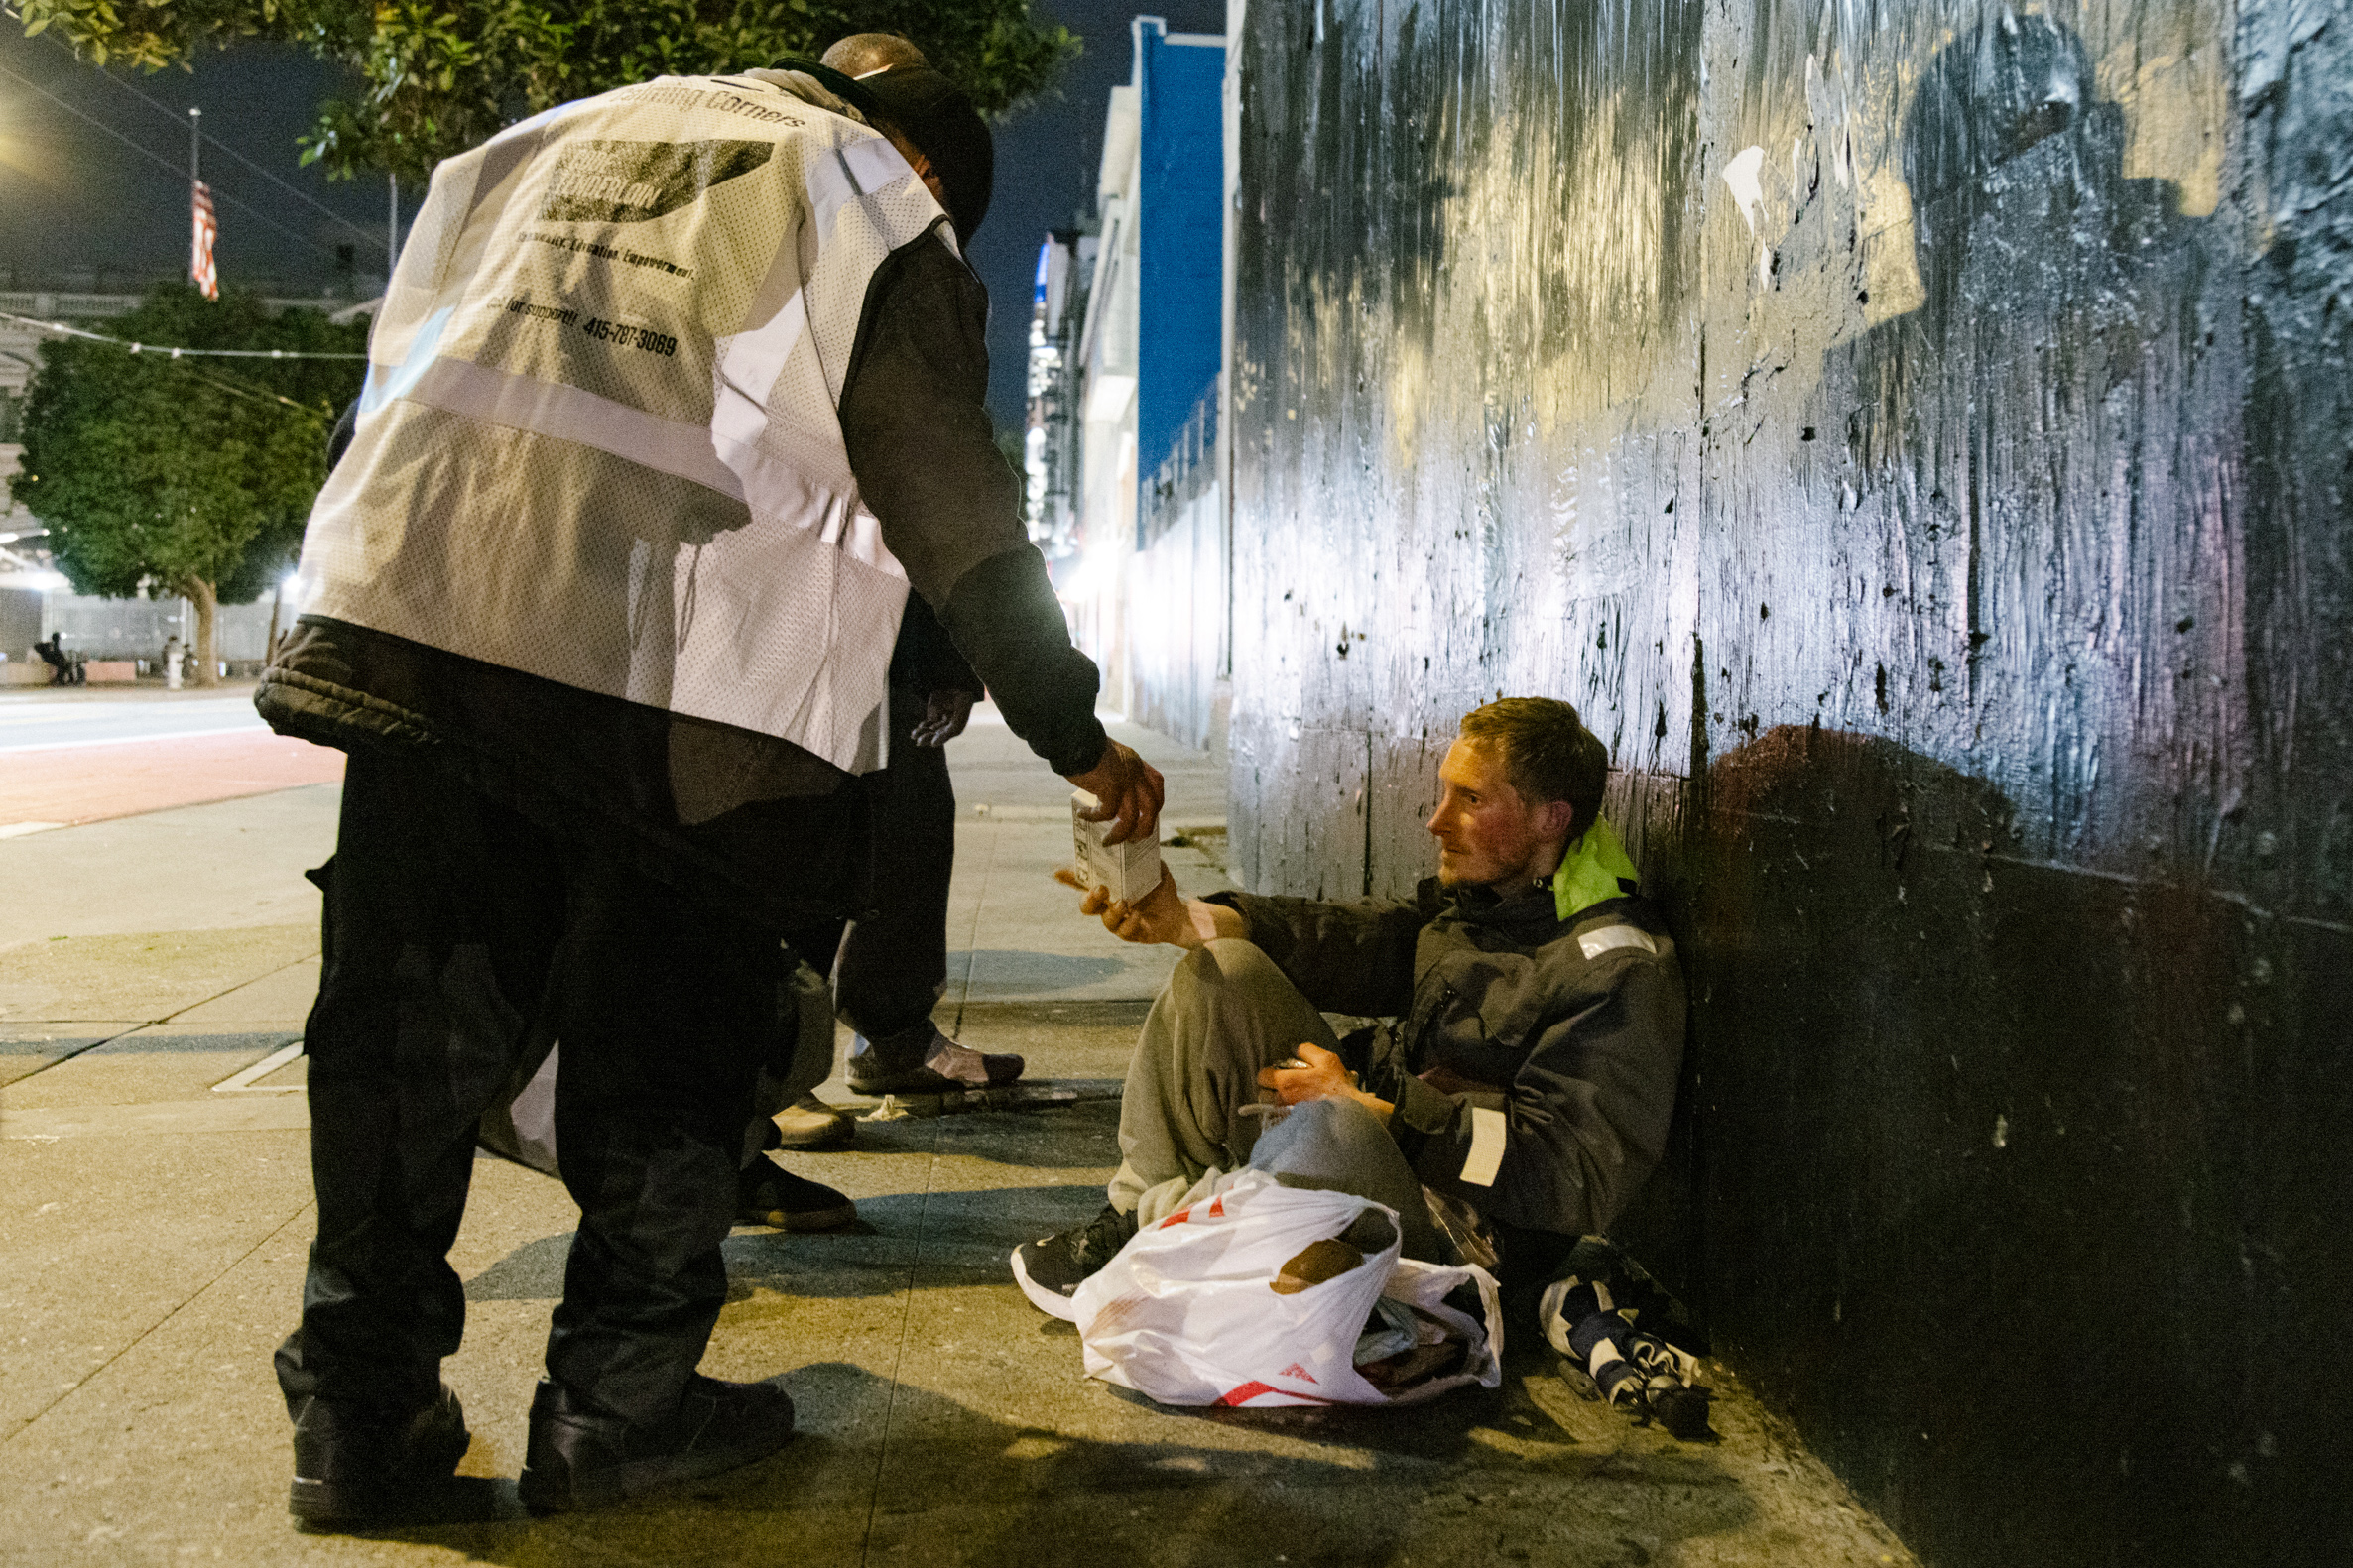 A person in a reflective vest hands a cup to a seated individual against a weathered wall at night.